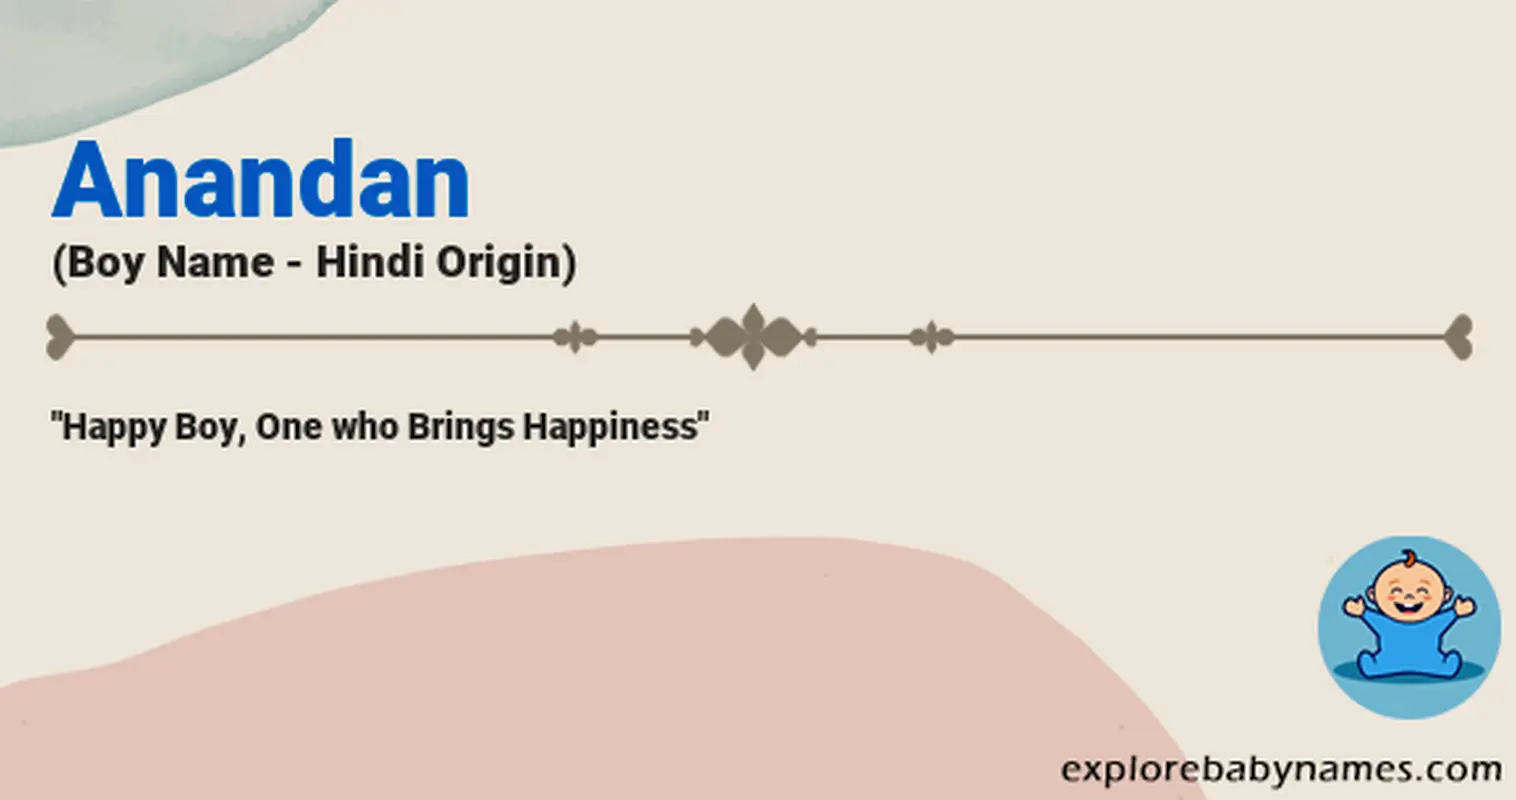 Meaning of Anandan